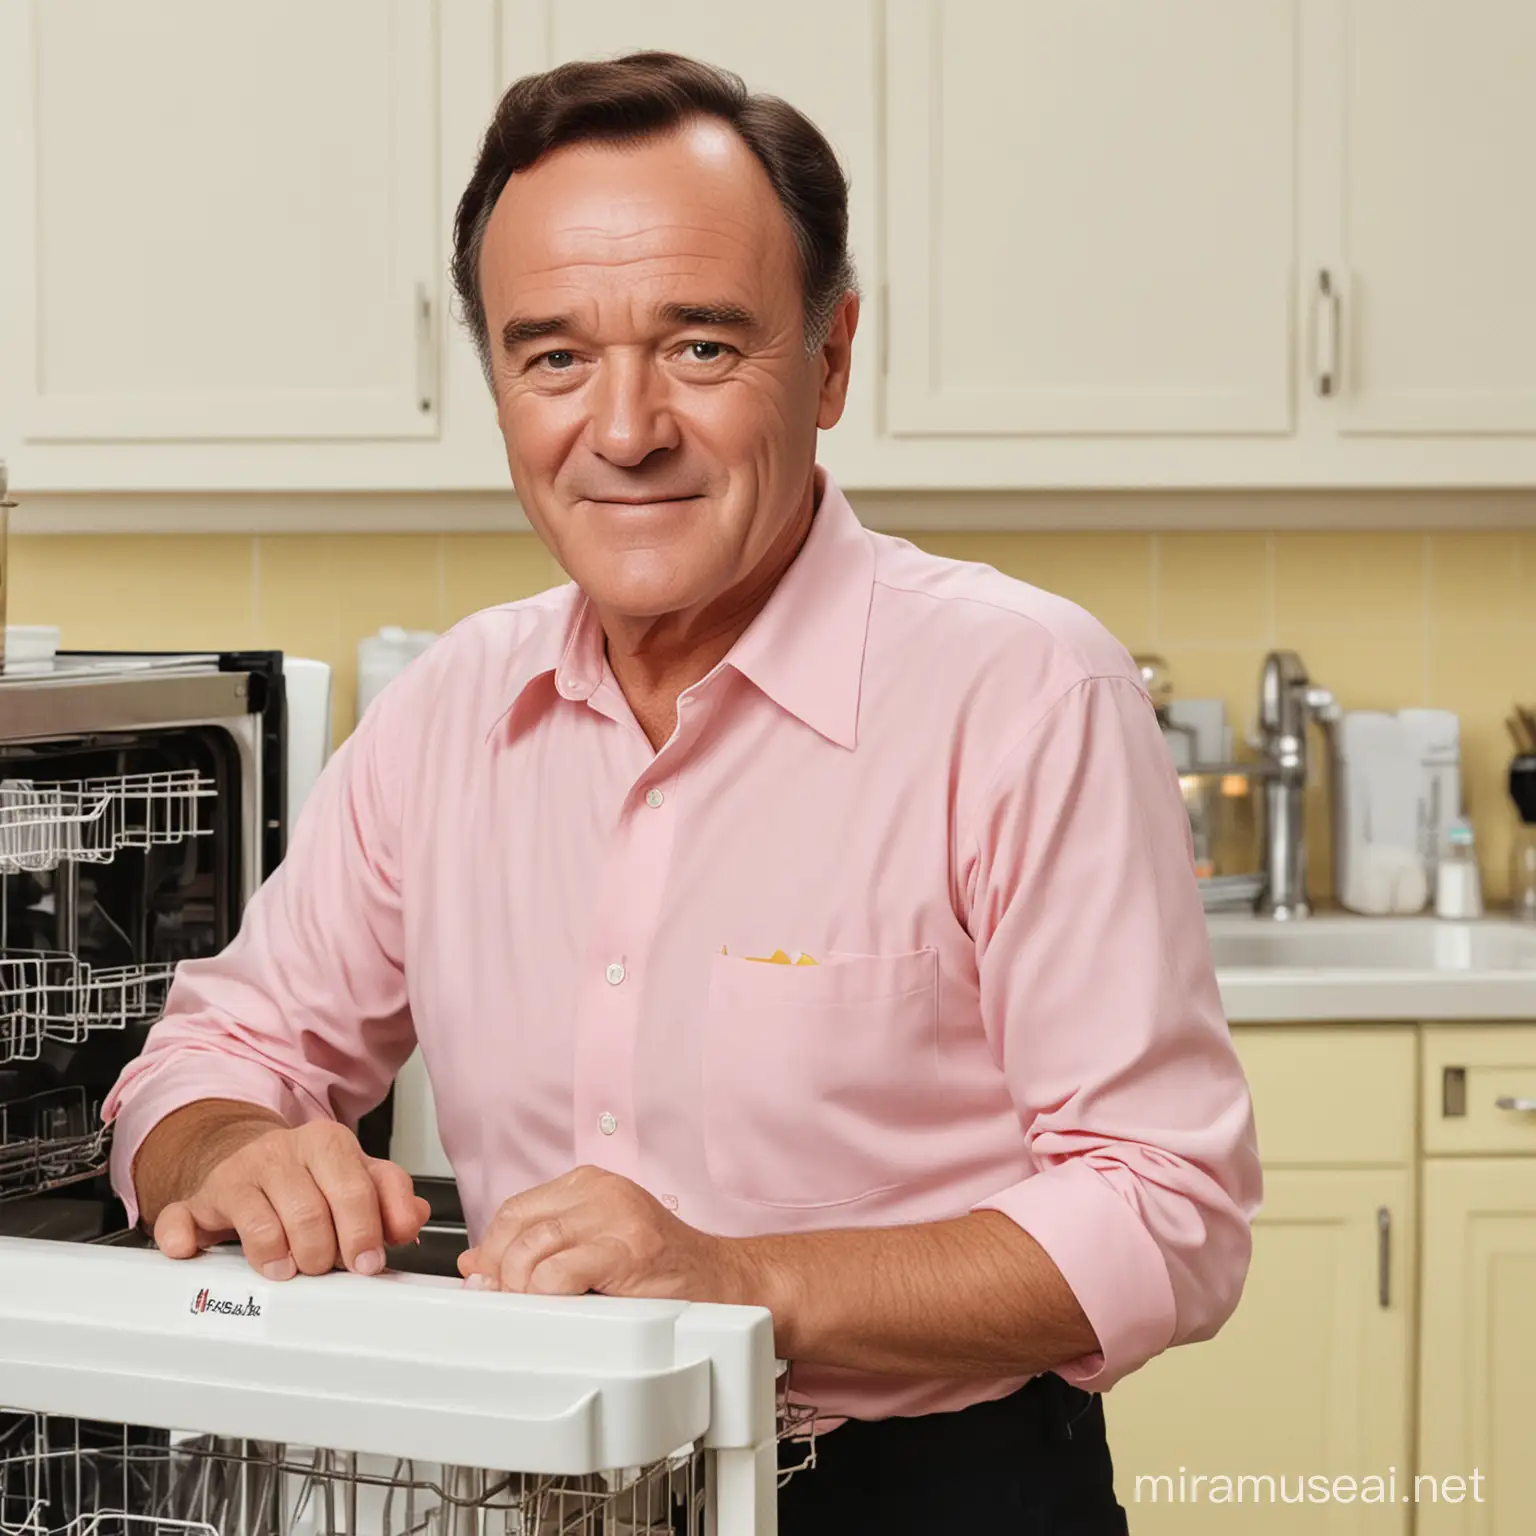 Young Jack Lemmon with Smart Dishwasher in Light Pink and Yellow